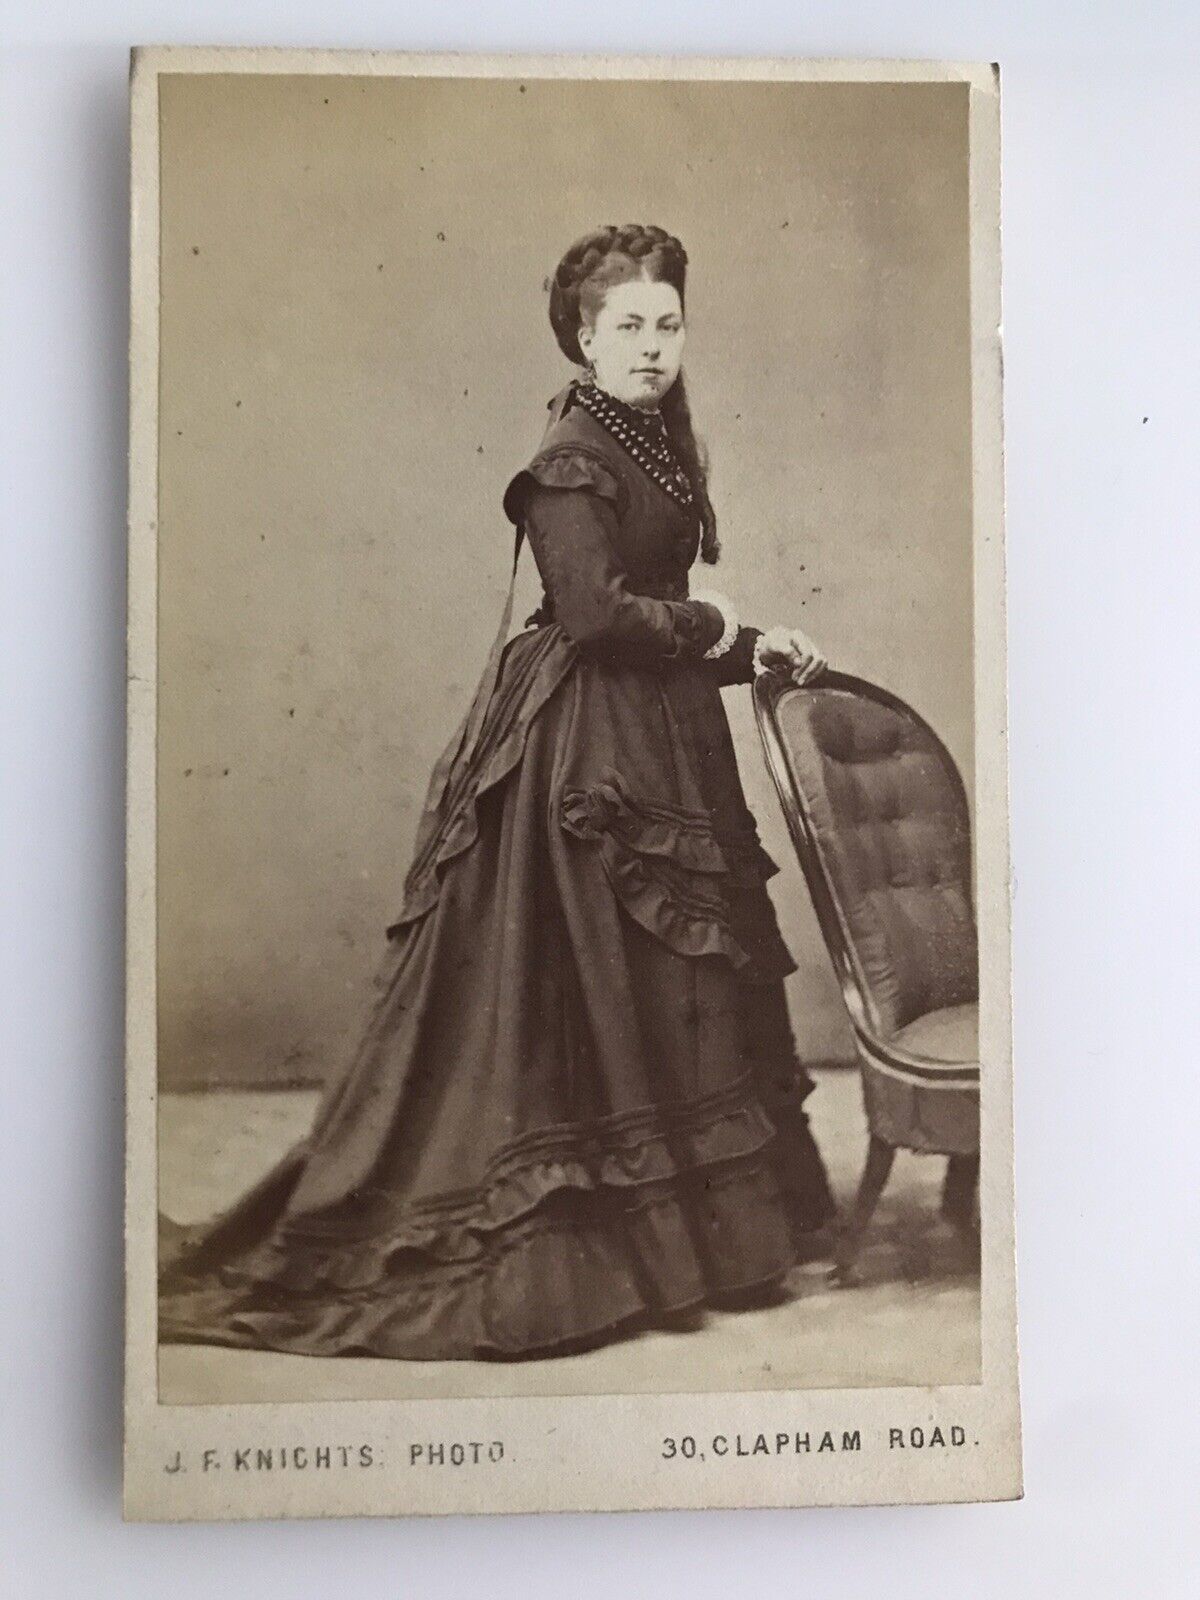 CdV. Fashionable Victorian Young Lady. J.F Knights, Clapham Rd, London. 1860-70s